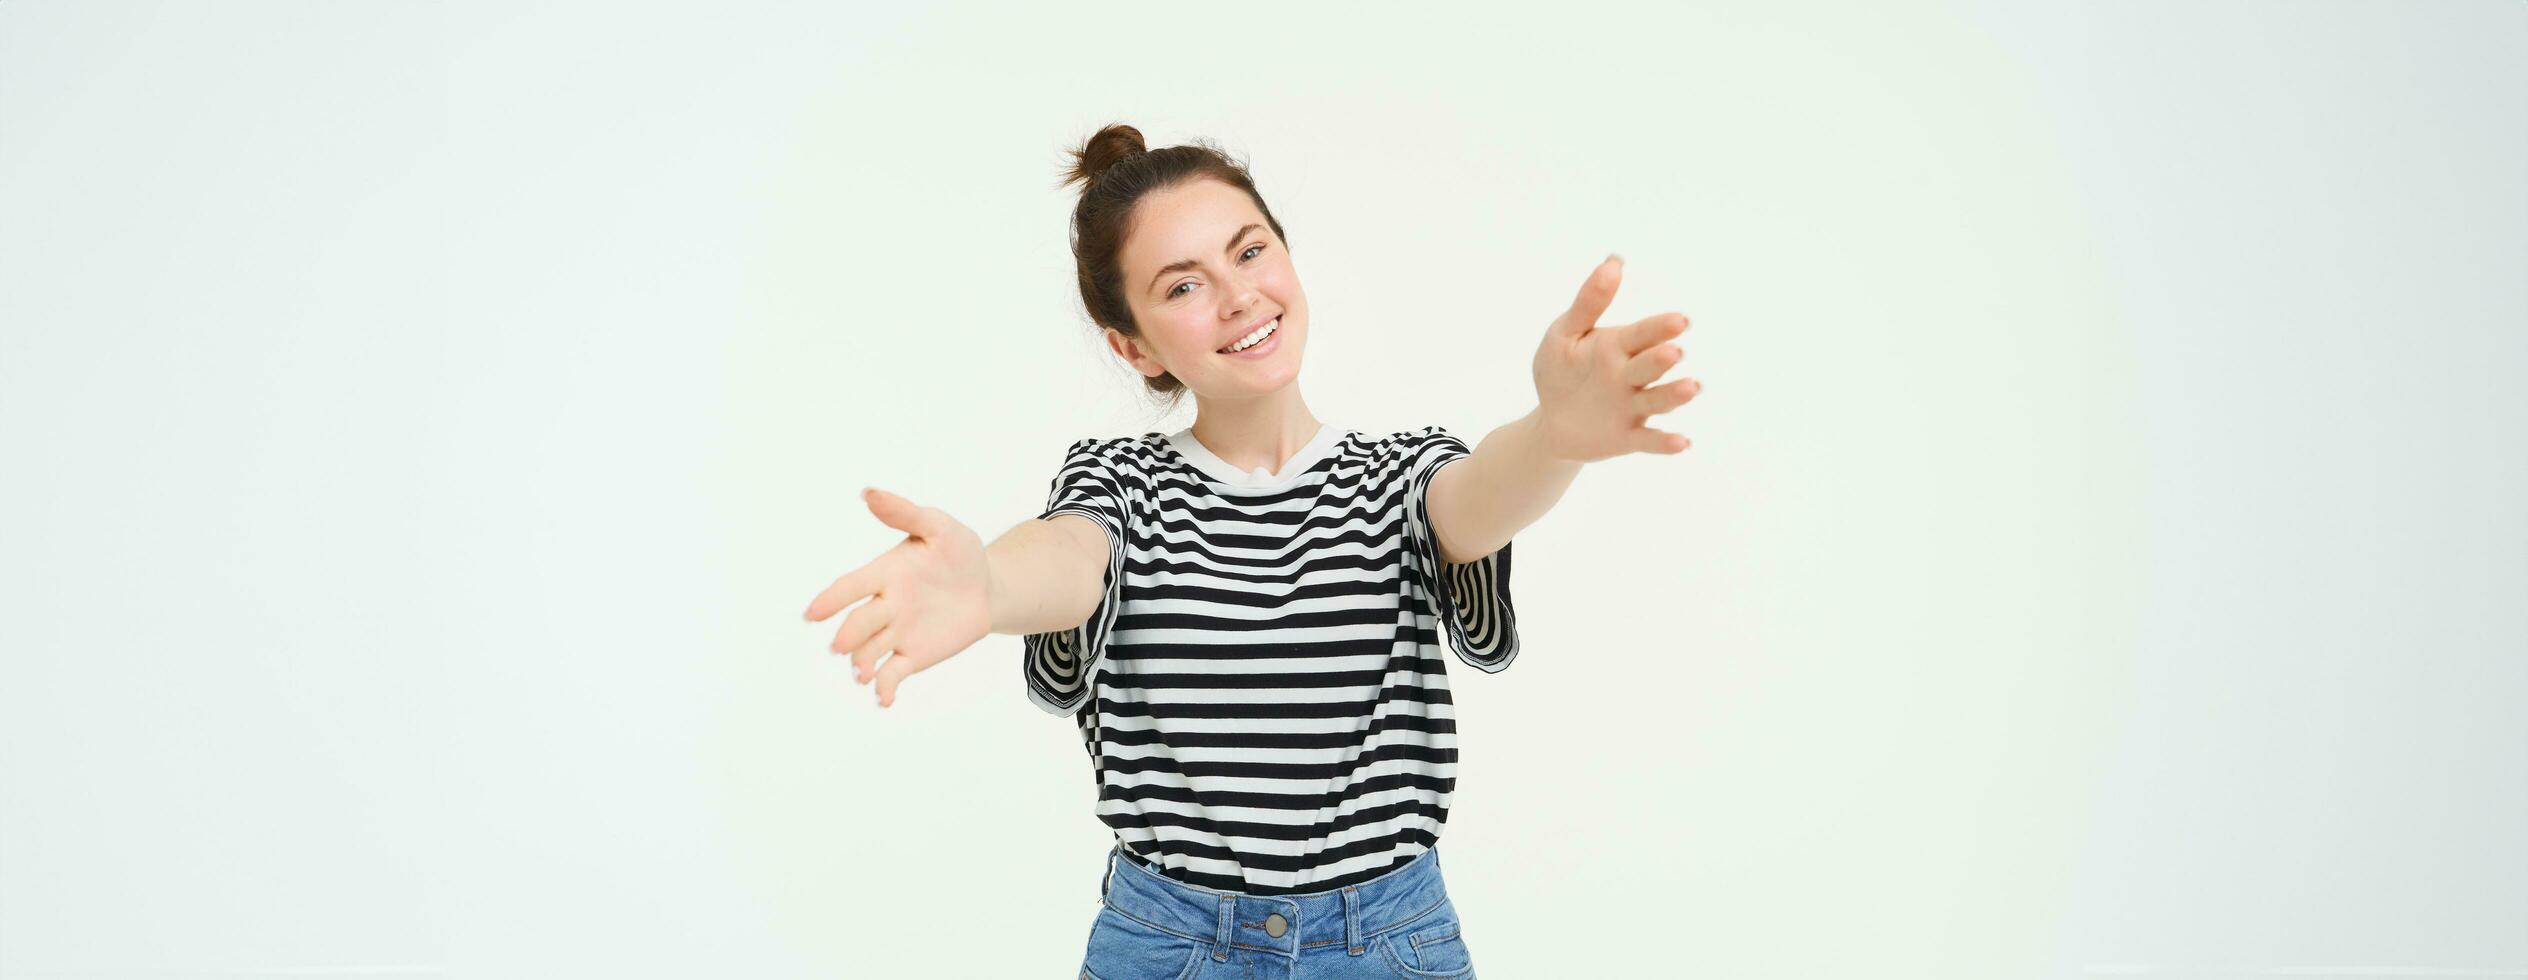 Portrait of smiling young woman reaching her hands, hugging you, wants to cuddle, stretching arms to receive, take smth, standing over white background photo